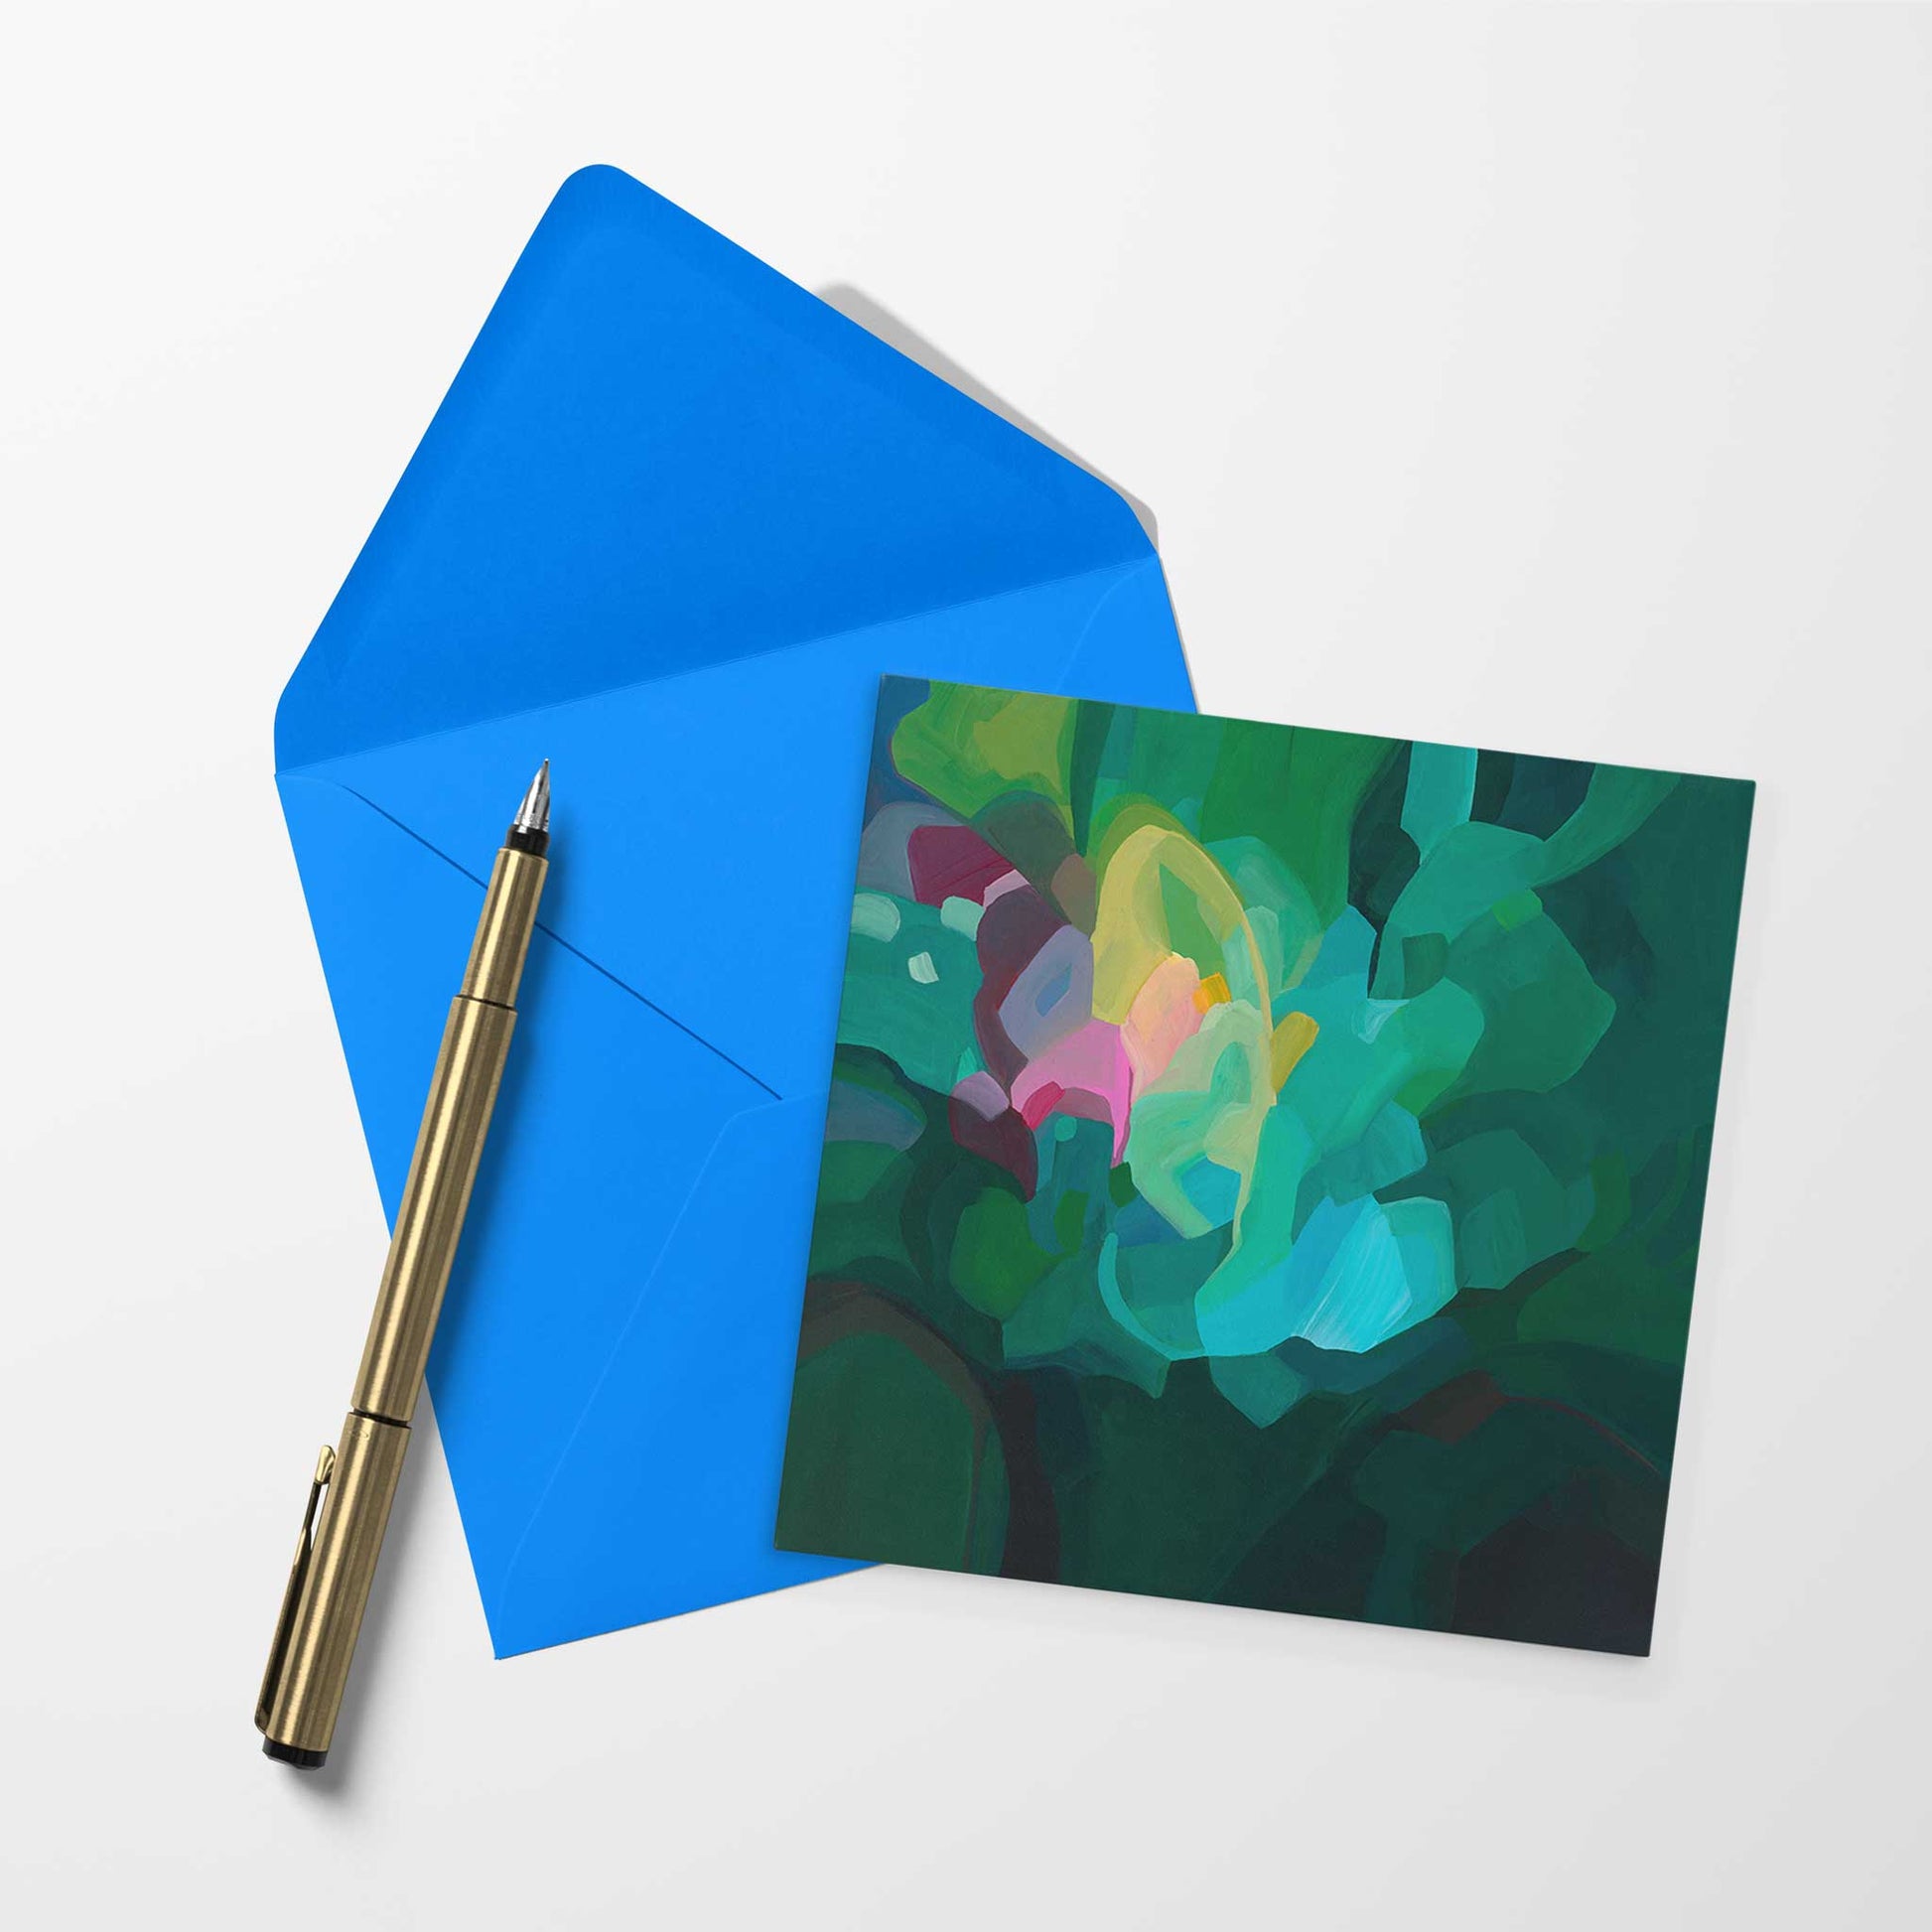 Blank art card with emerald abtract artwork and bright blue envelope